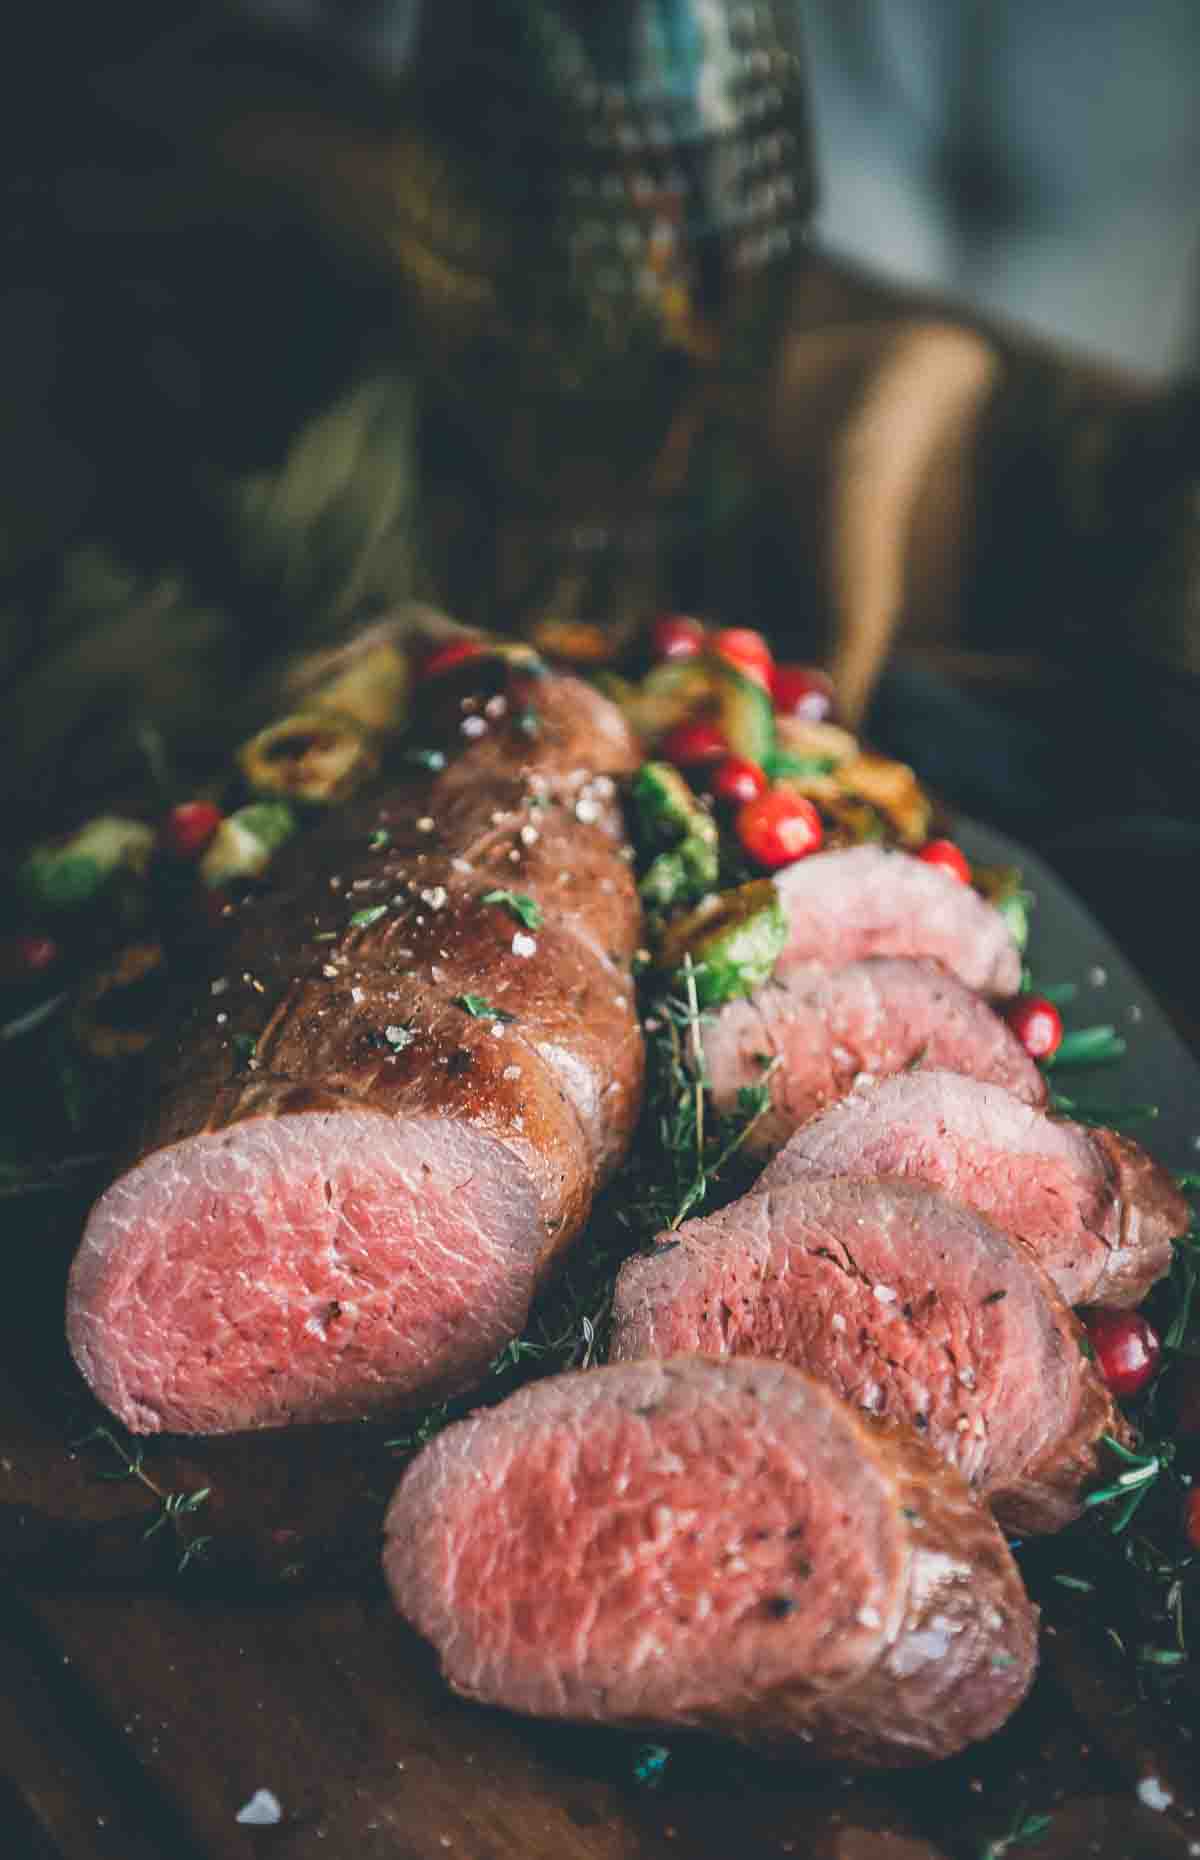 Beef tenderloin cooked and sliced, showing a rosy pink center.